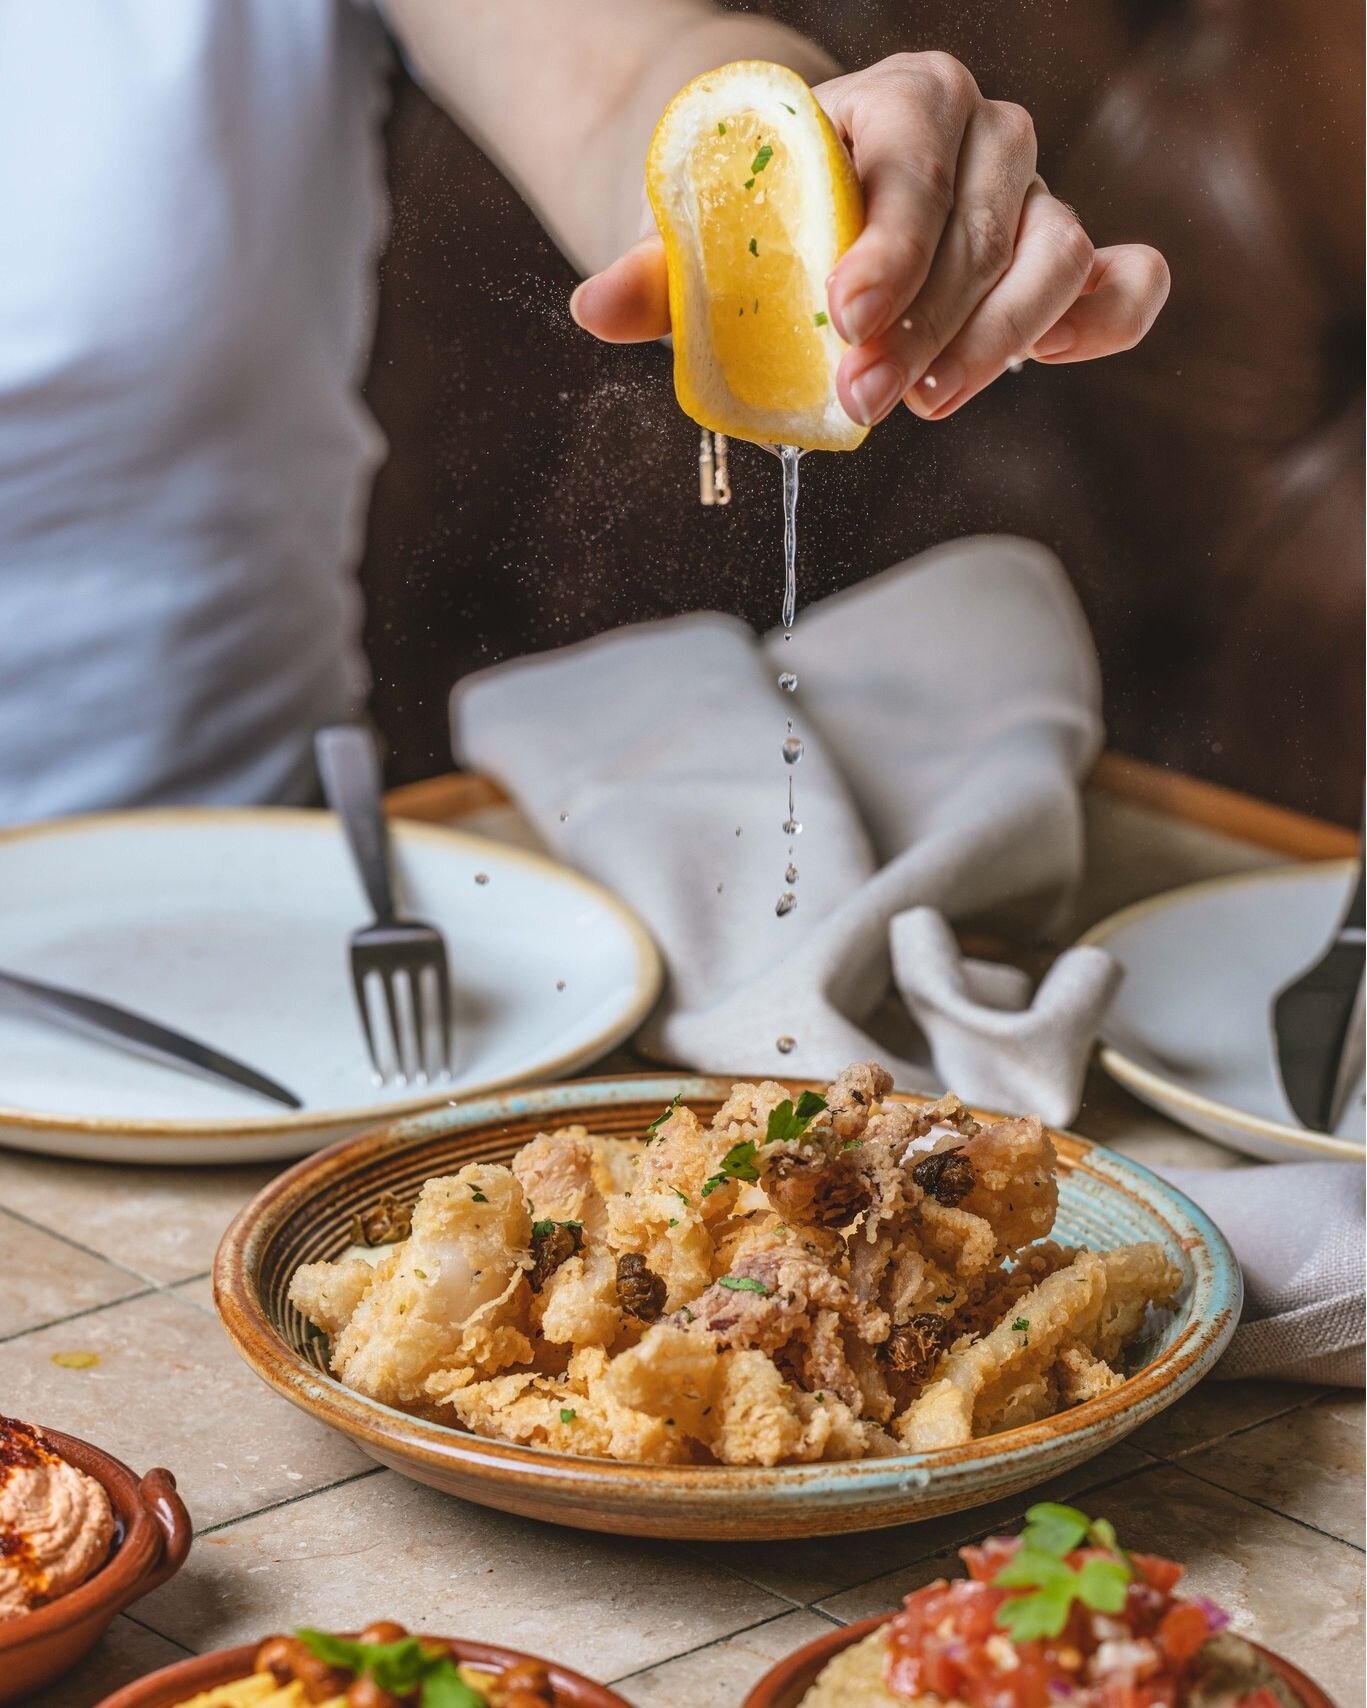 Our Fried Calamari provides a crispy, tender and zesty flavour profile with every mouthful. A dish representing the riches of the sea with a touch of Mykonos cuisine. 

Visit us and explore our menu. Walks-ins and reservations are welcome.

#mimby182